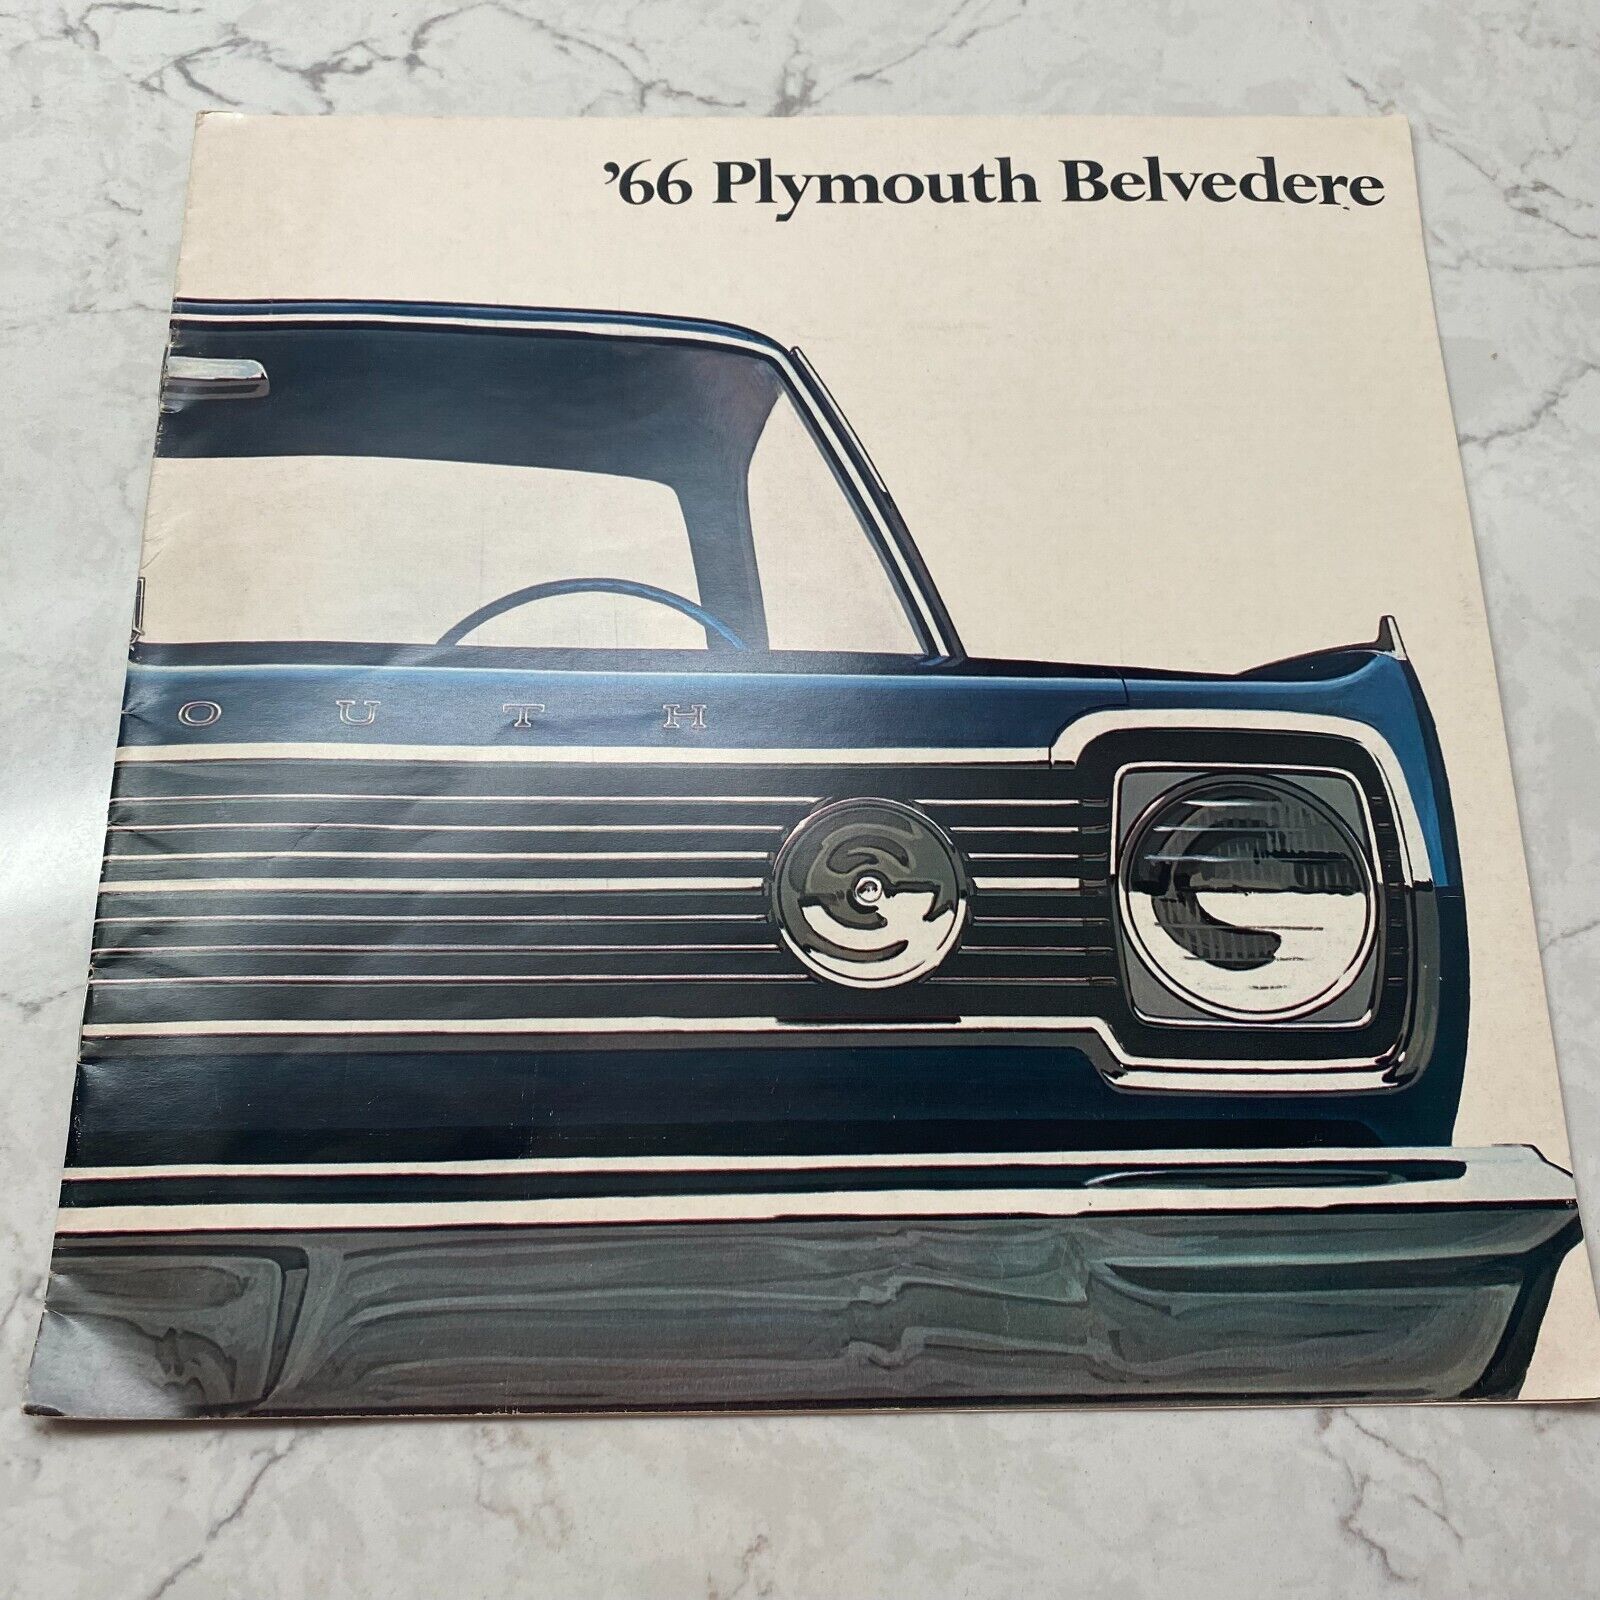 1966 Plymouth Belvedere II Satellite Convertible & Station Wagon Sales Brochure